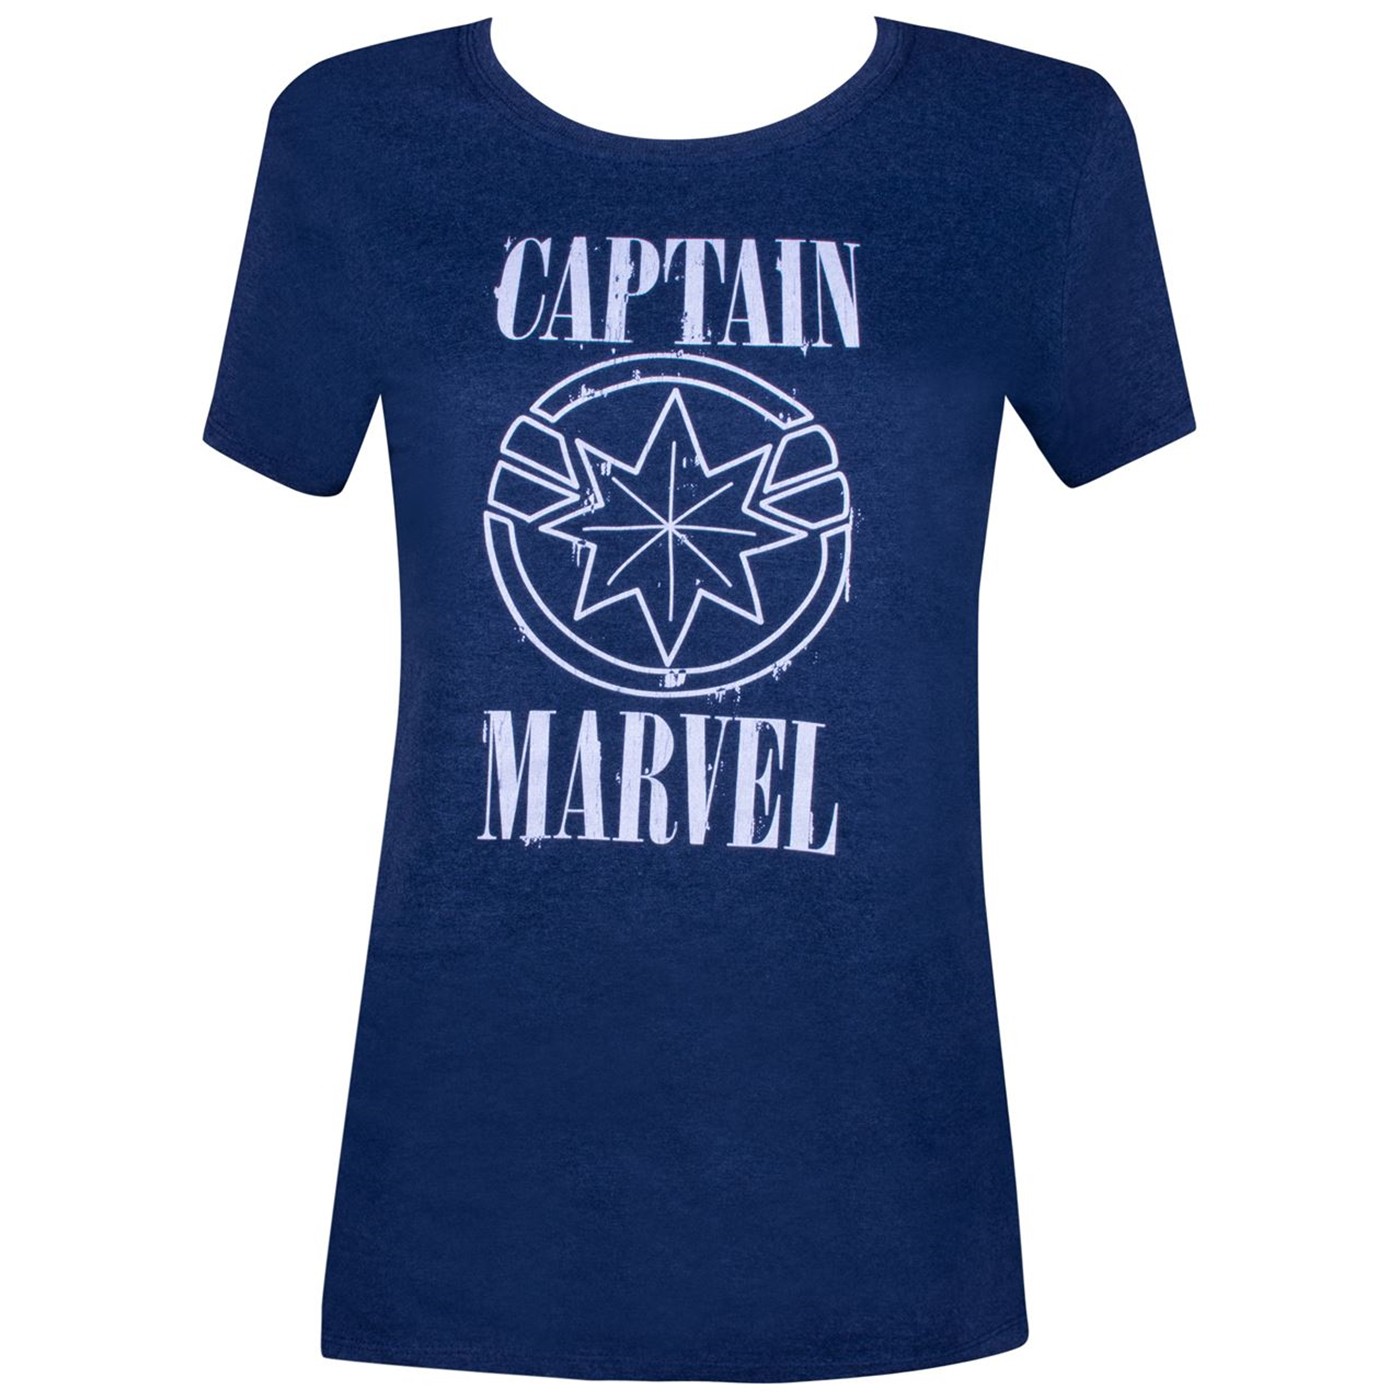 Captain Marvel Movie White Text and Symbol Women's T-Shirt